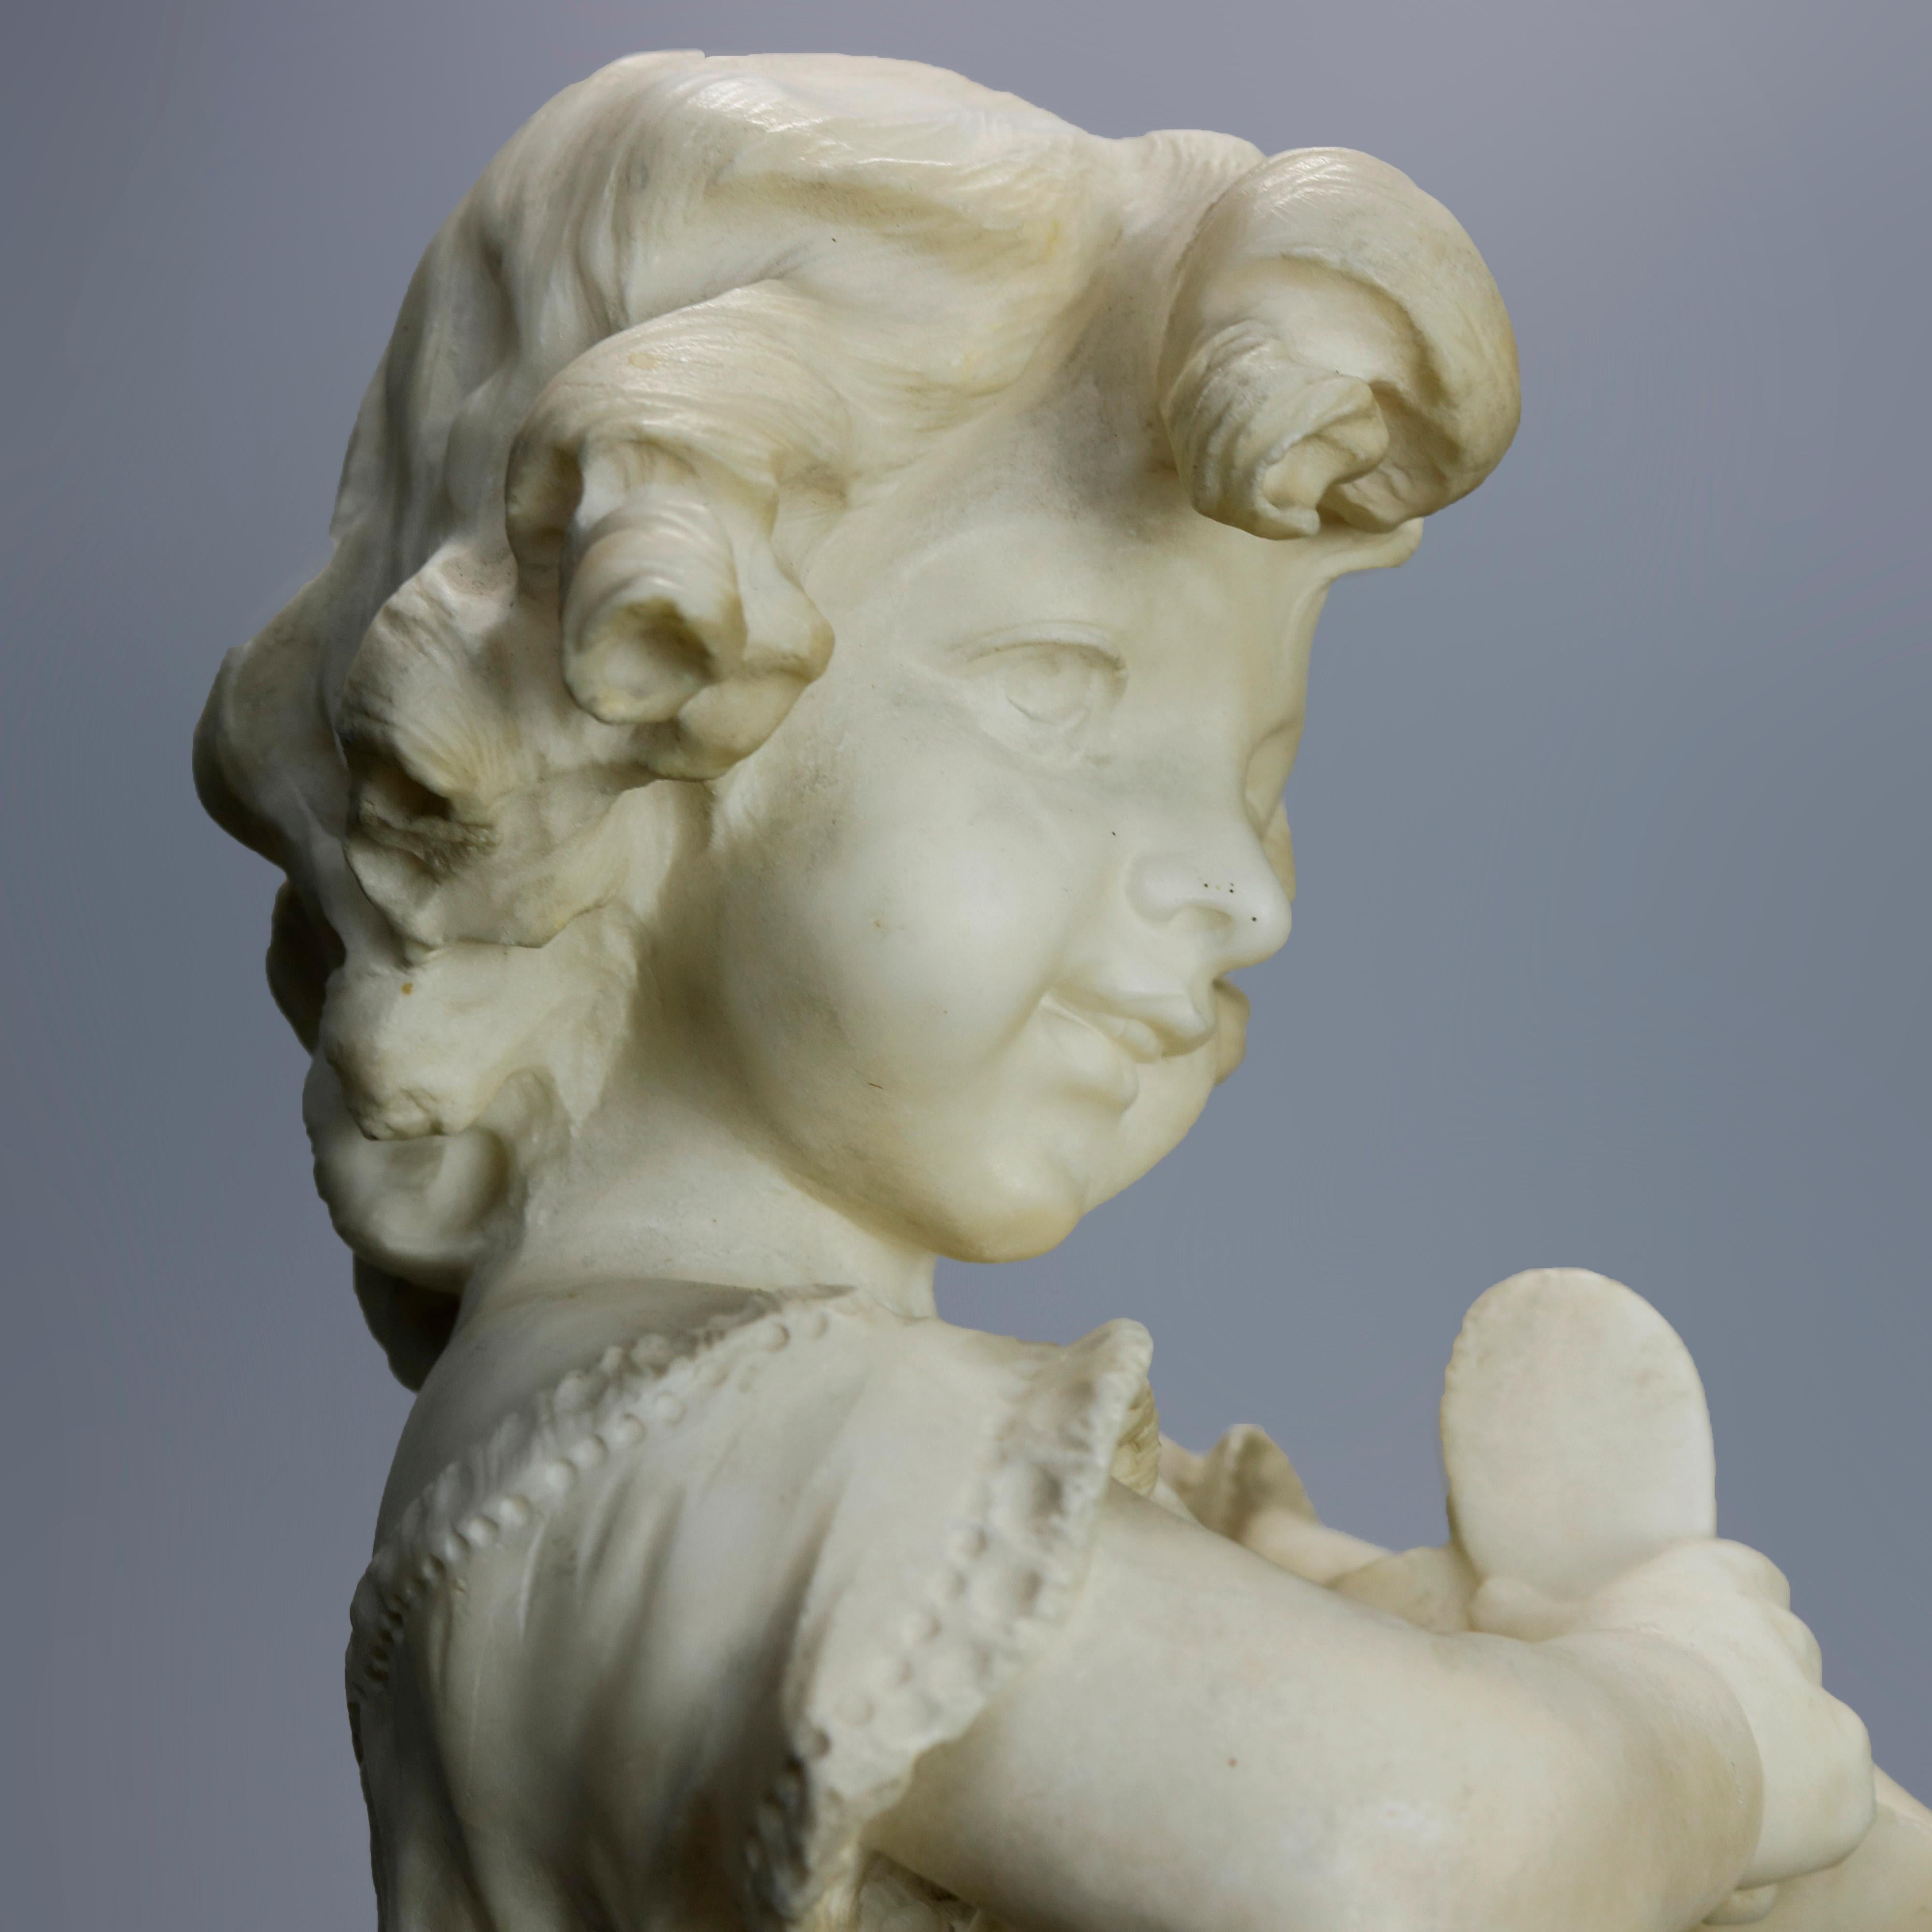 Italian Antique Carved Alabaster Sculpture of Young Girl by Adolpho Cipriani, c1890